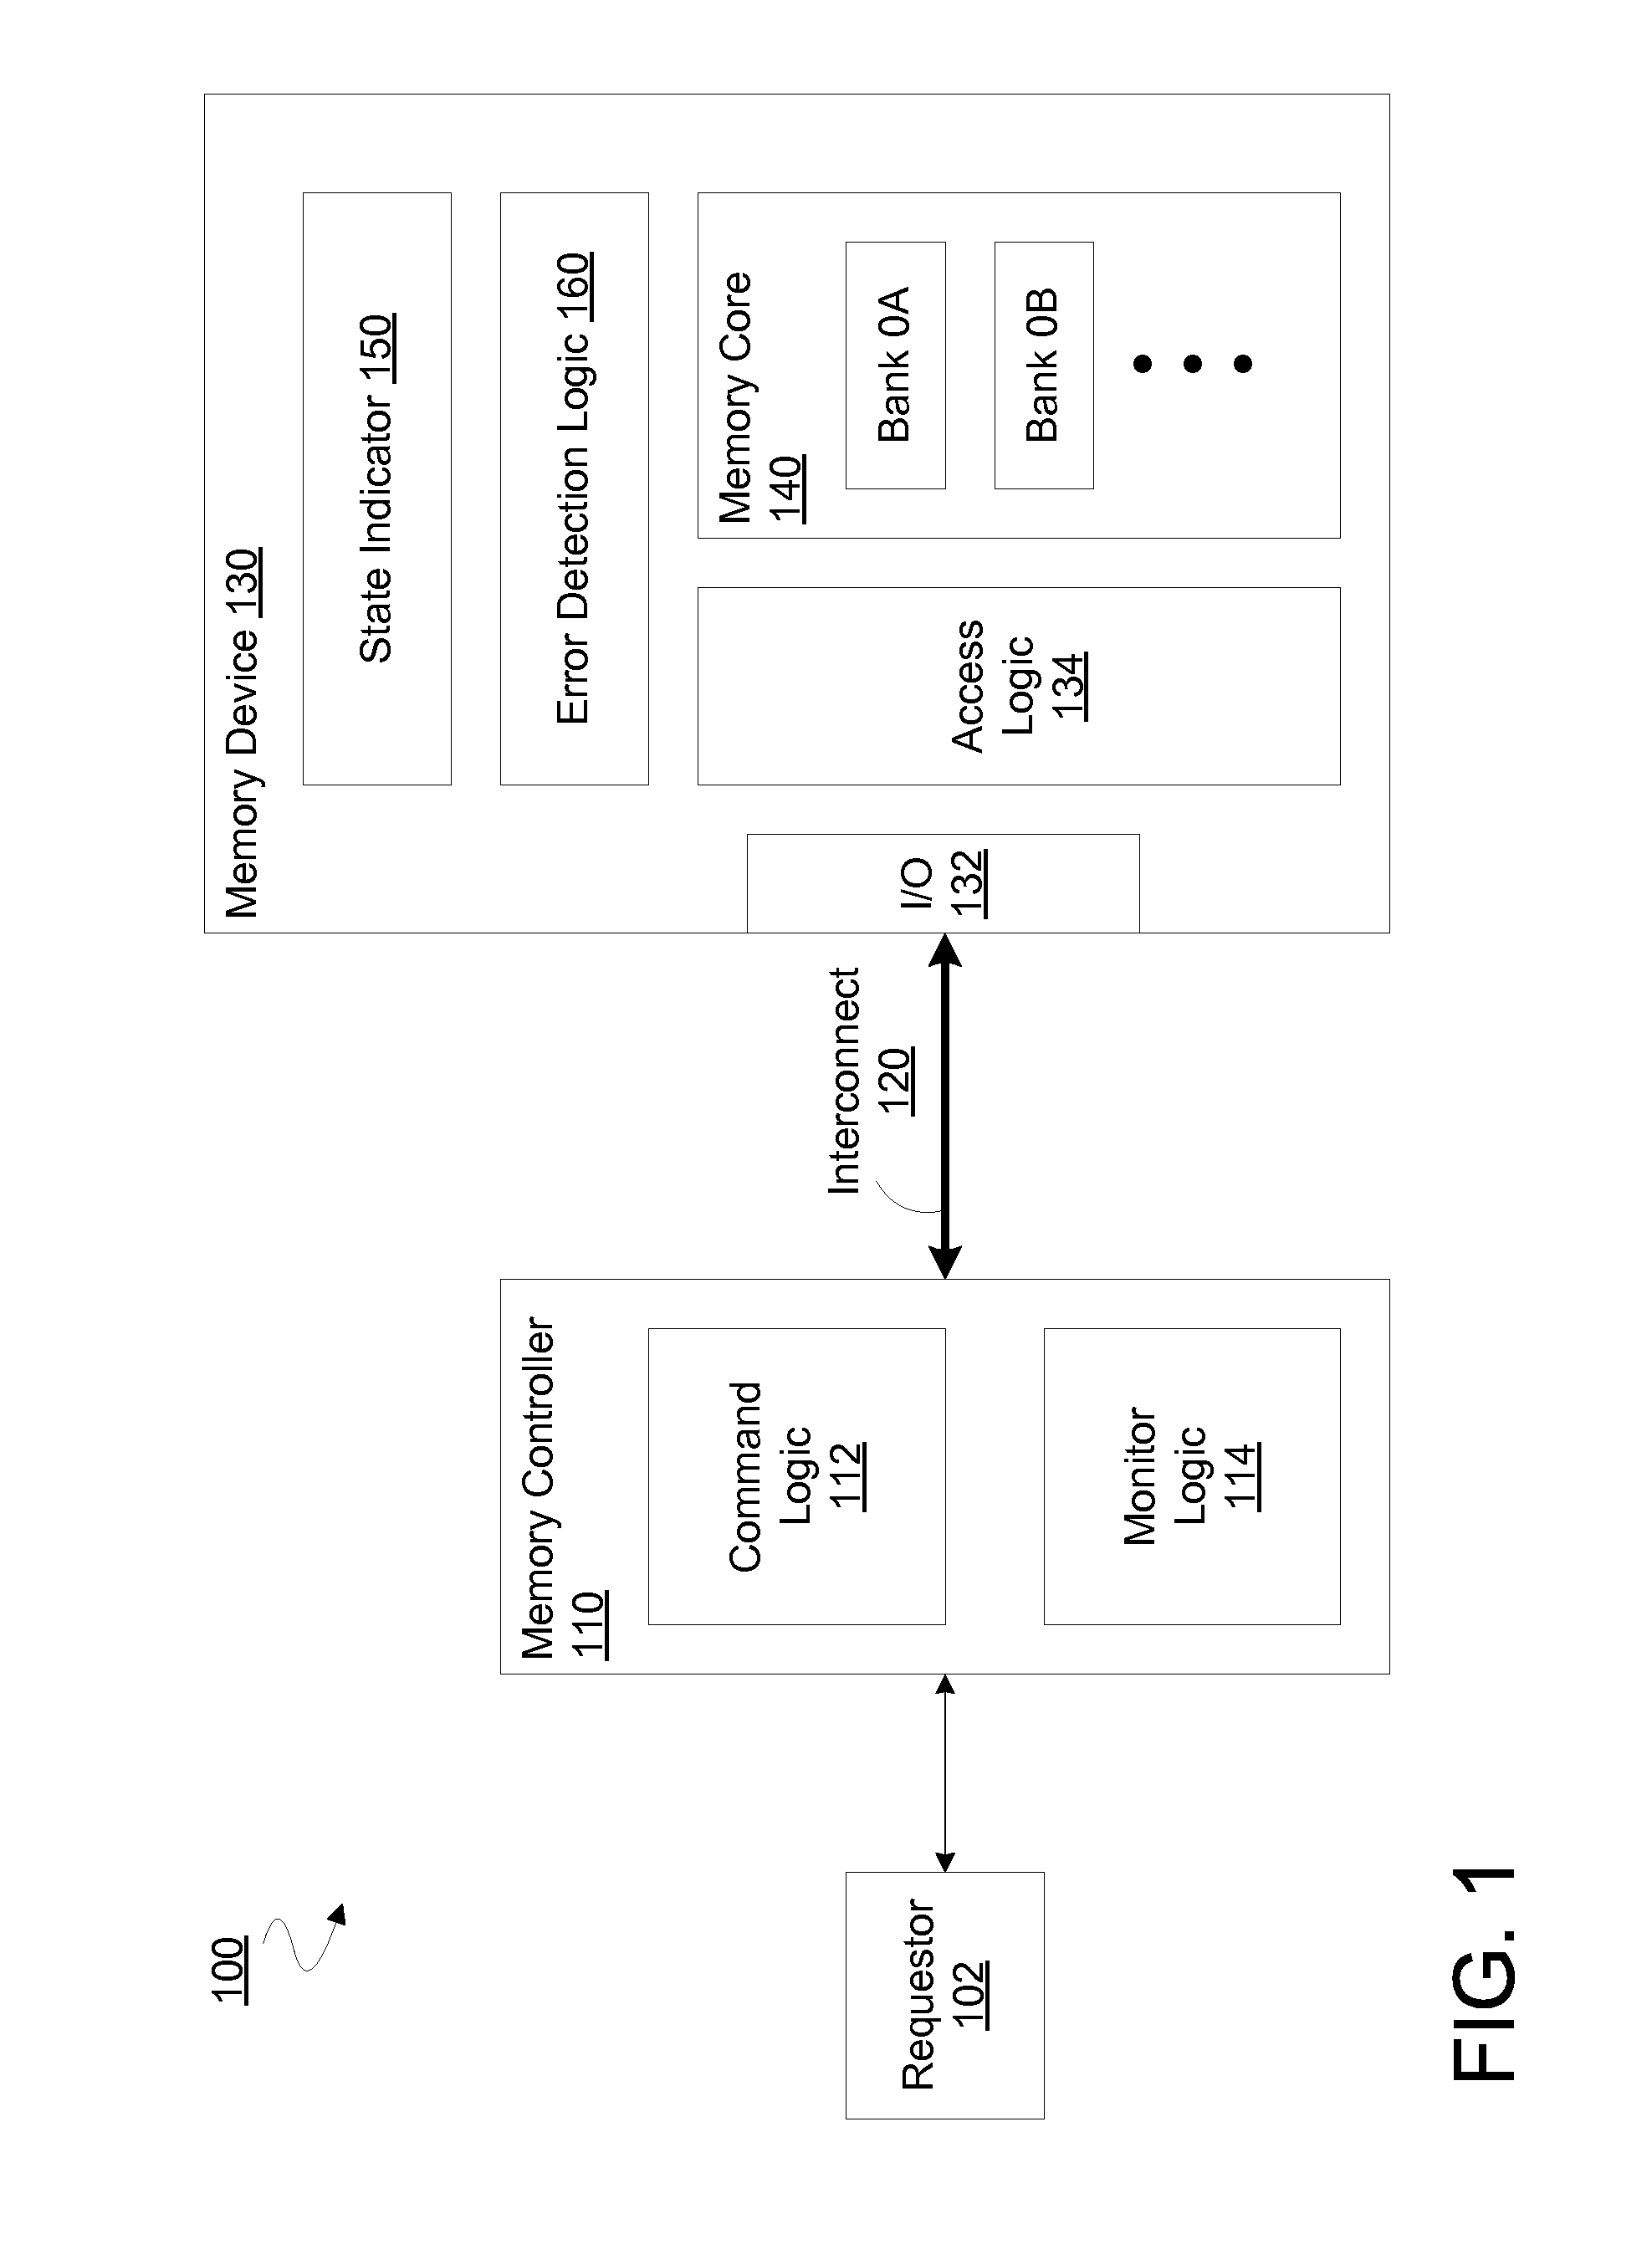 Apparatus, method and system for reporting dynamic random access memory error information